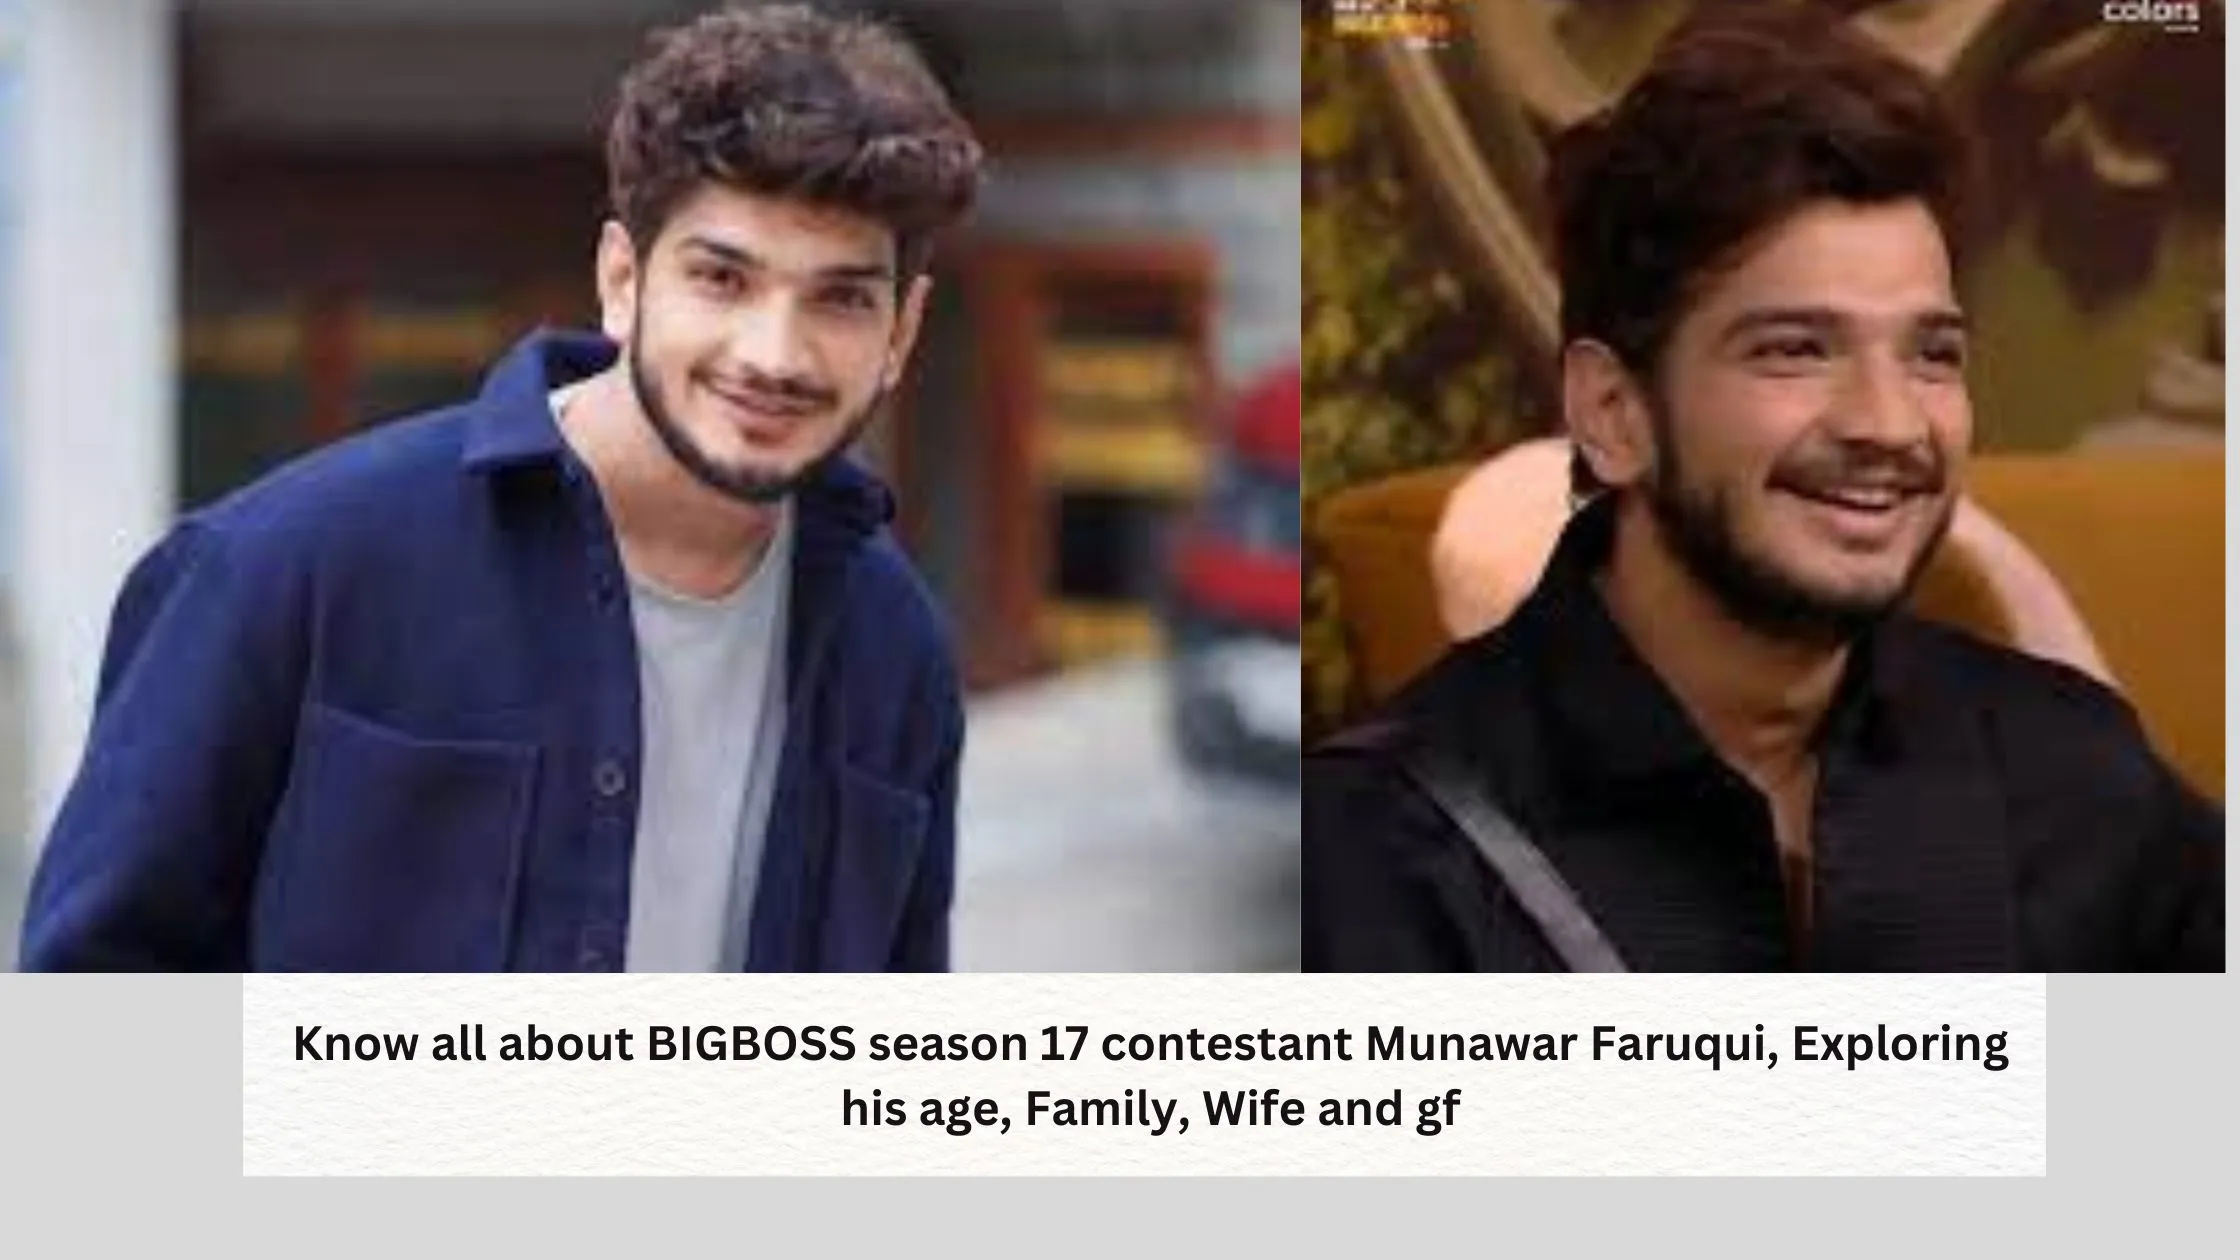 Amazing facts about BIGBOSS season 17 contestant Munawar Faruqui, Exploring his age, Family, Wife and gf